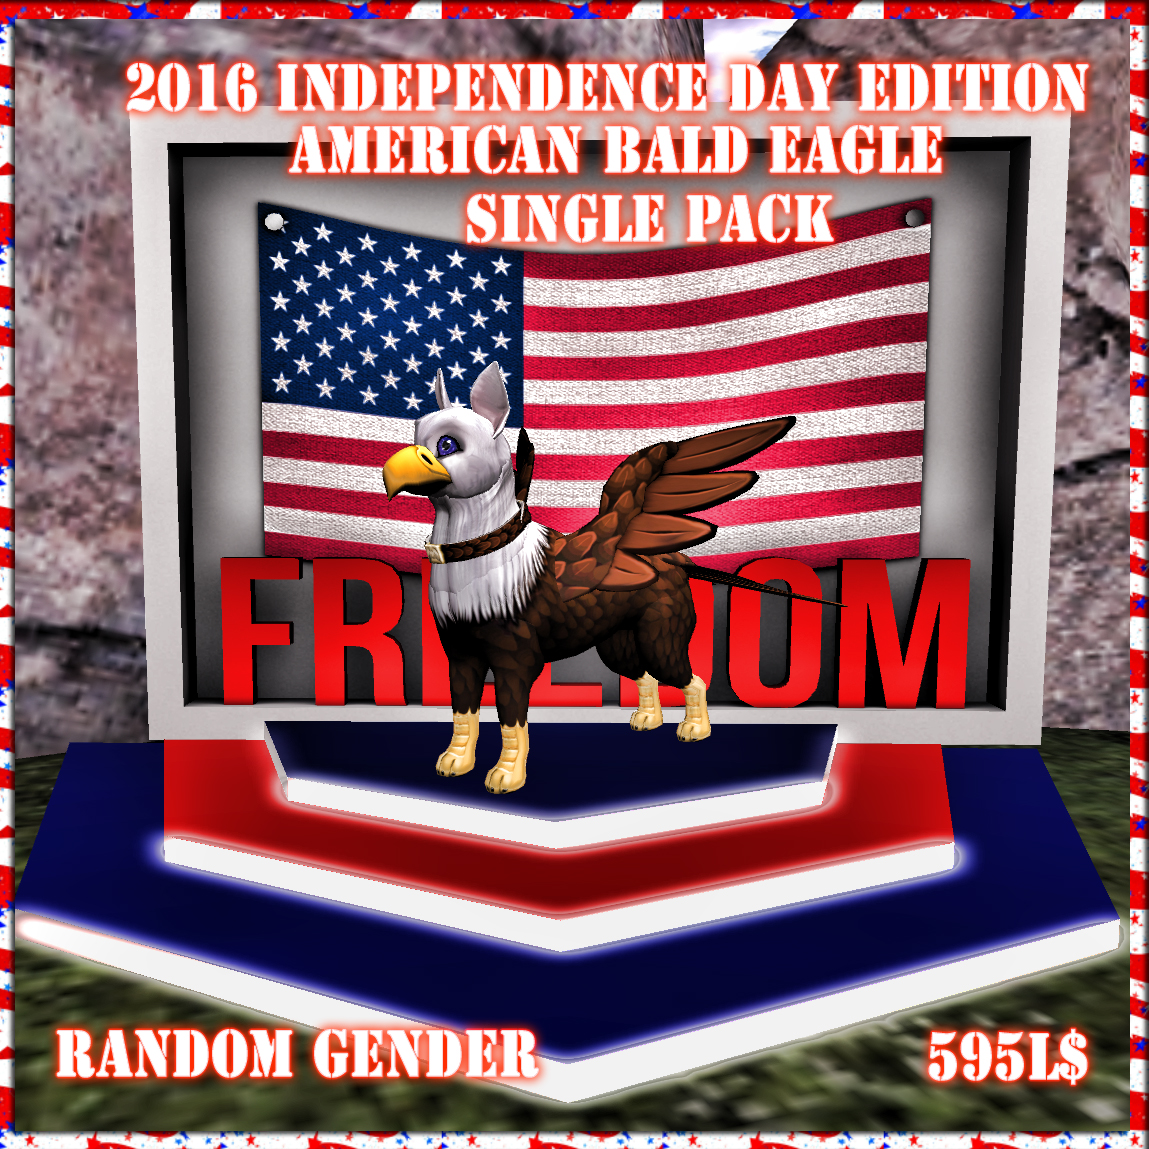 2016 Independence Day Edition American Bald EagleK9